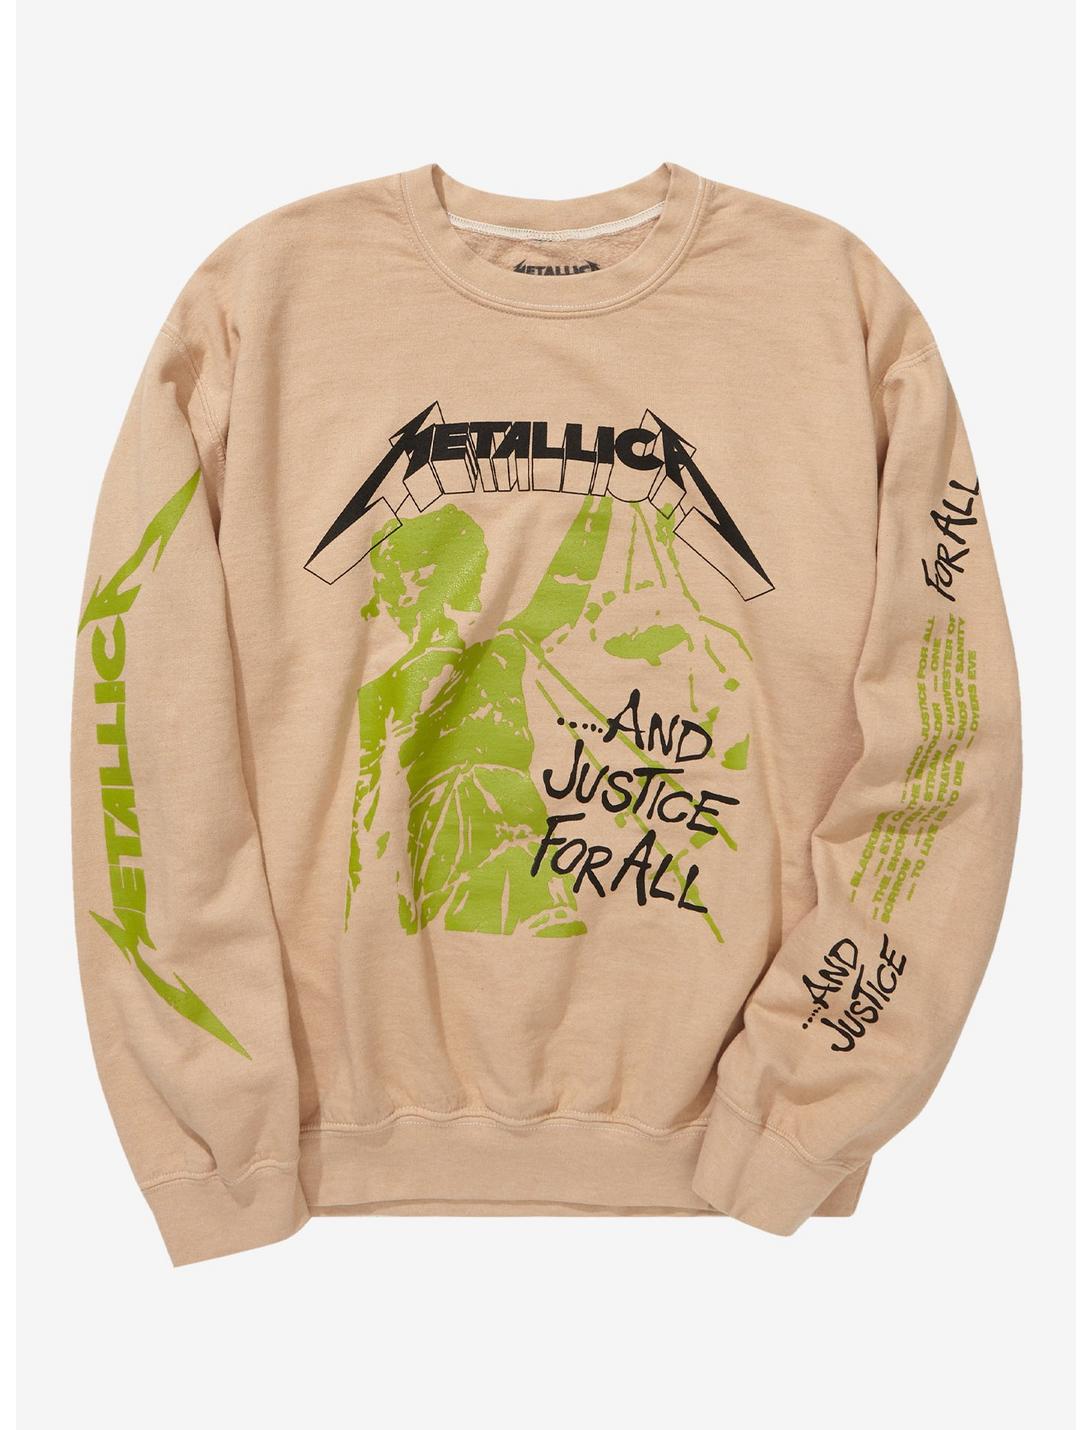 Metallica ...And Justice For All Girls Sweatshirt, NATURAL, hi-res